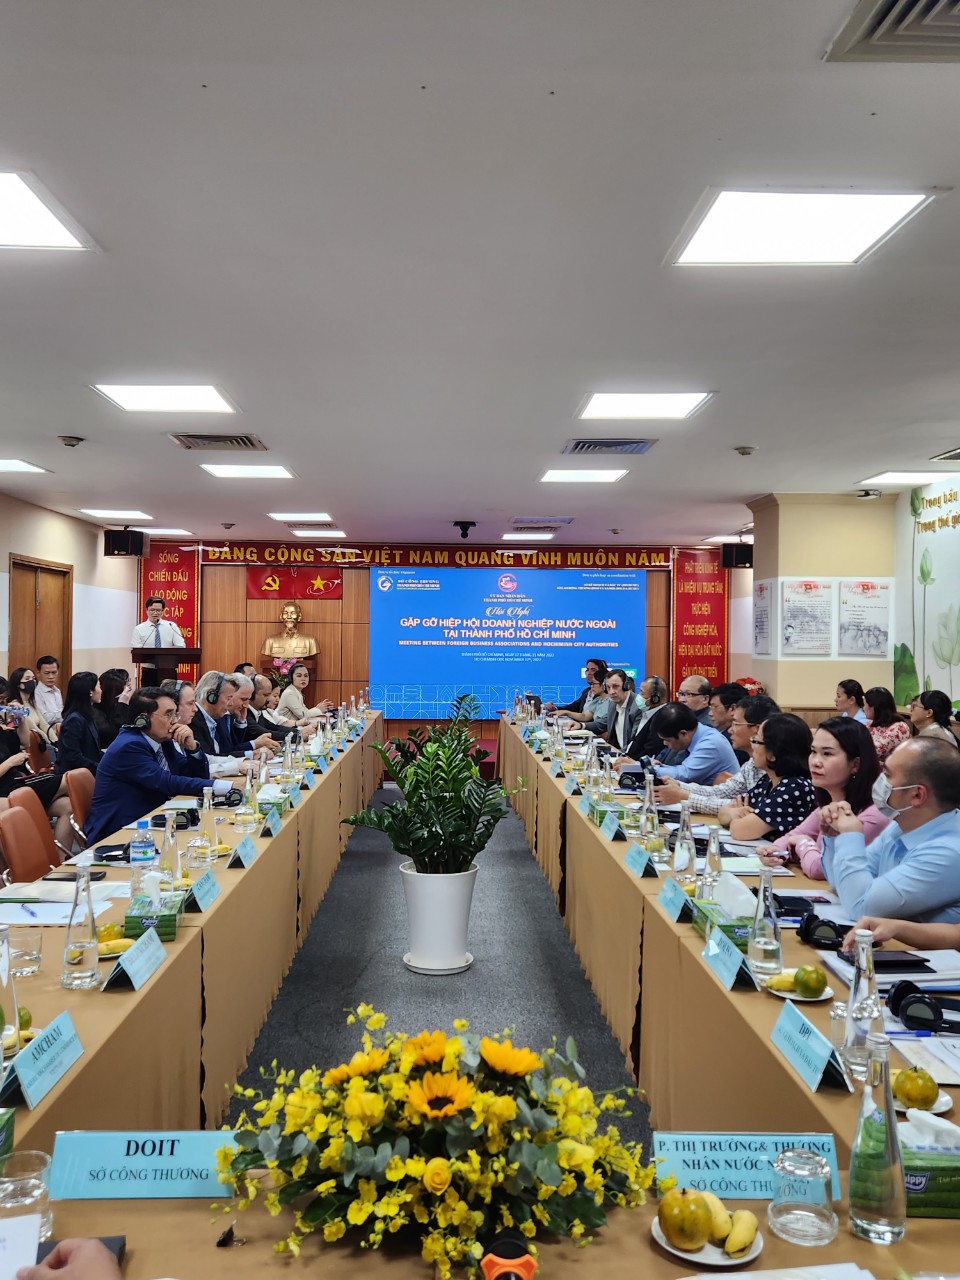 Meeting of foreign business associations in Ho Chi Minh City